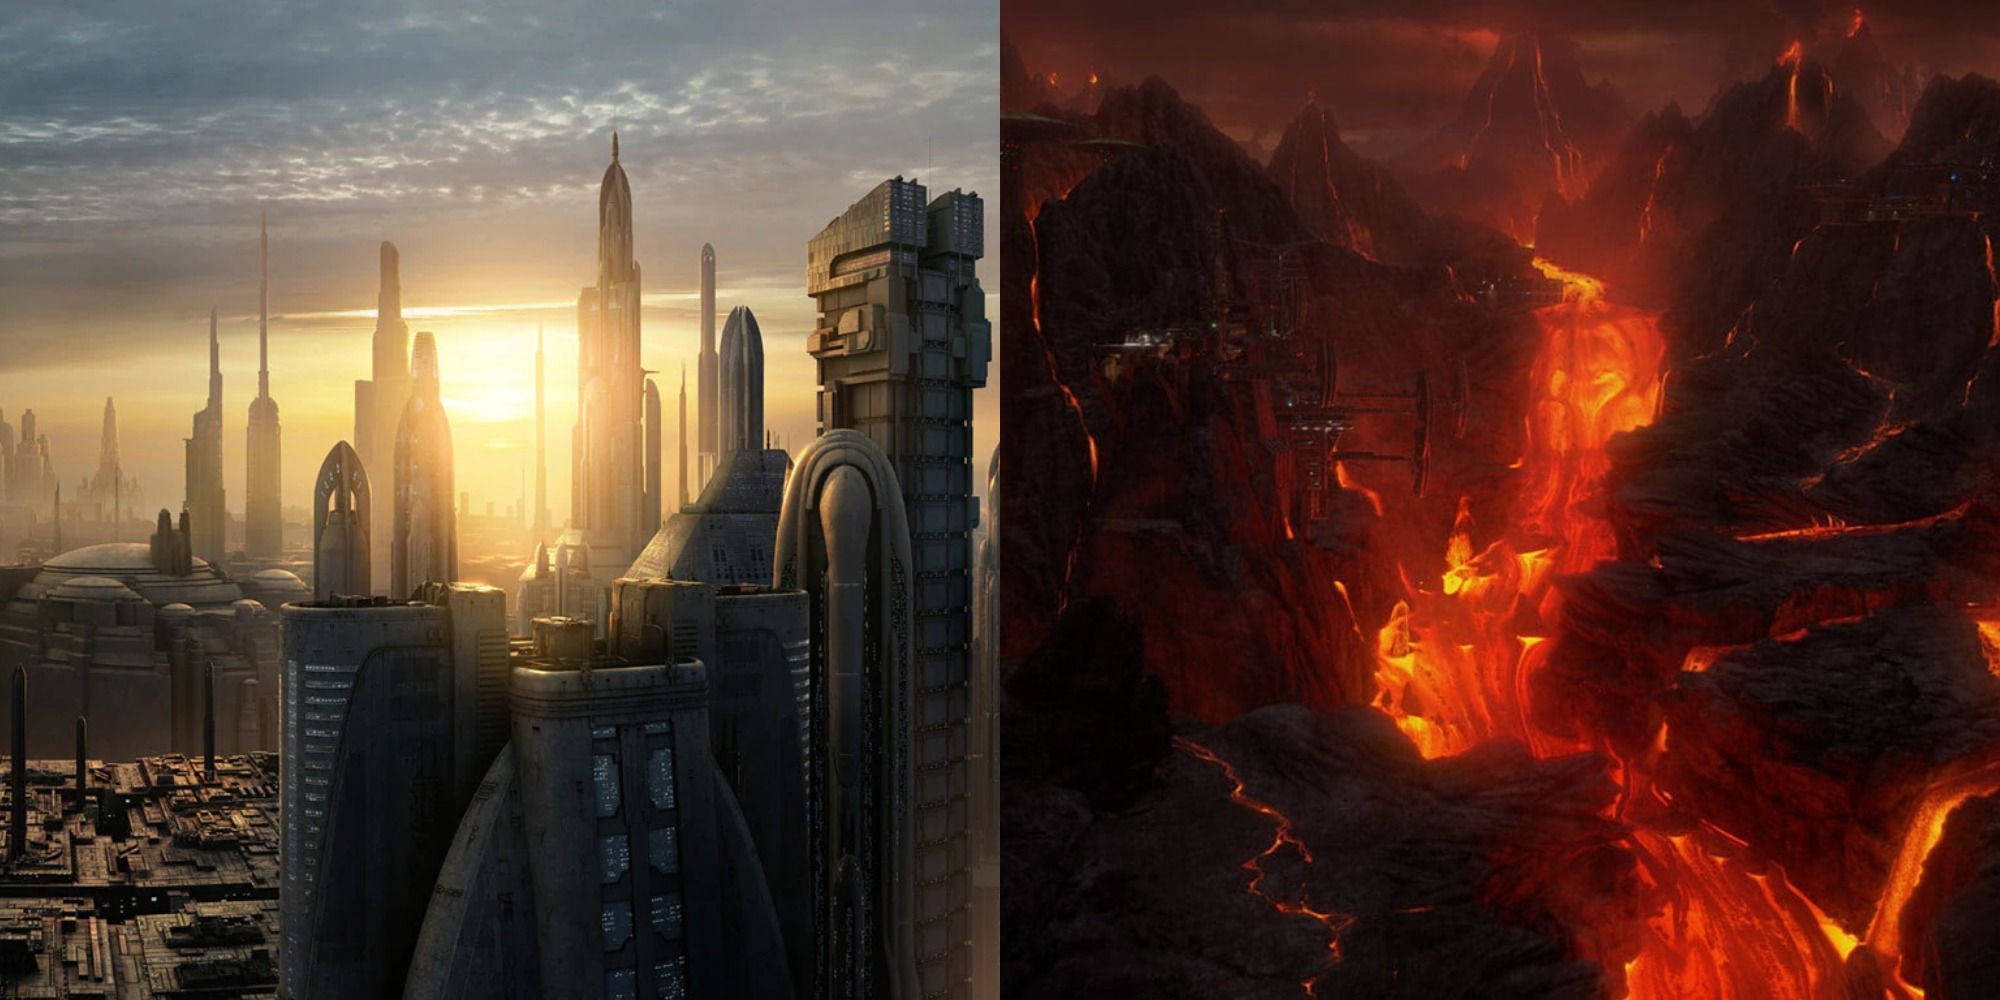 Split image showing Coruscant and Mustafar as seen in Star Wars